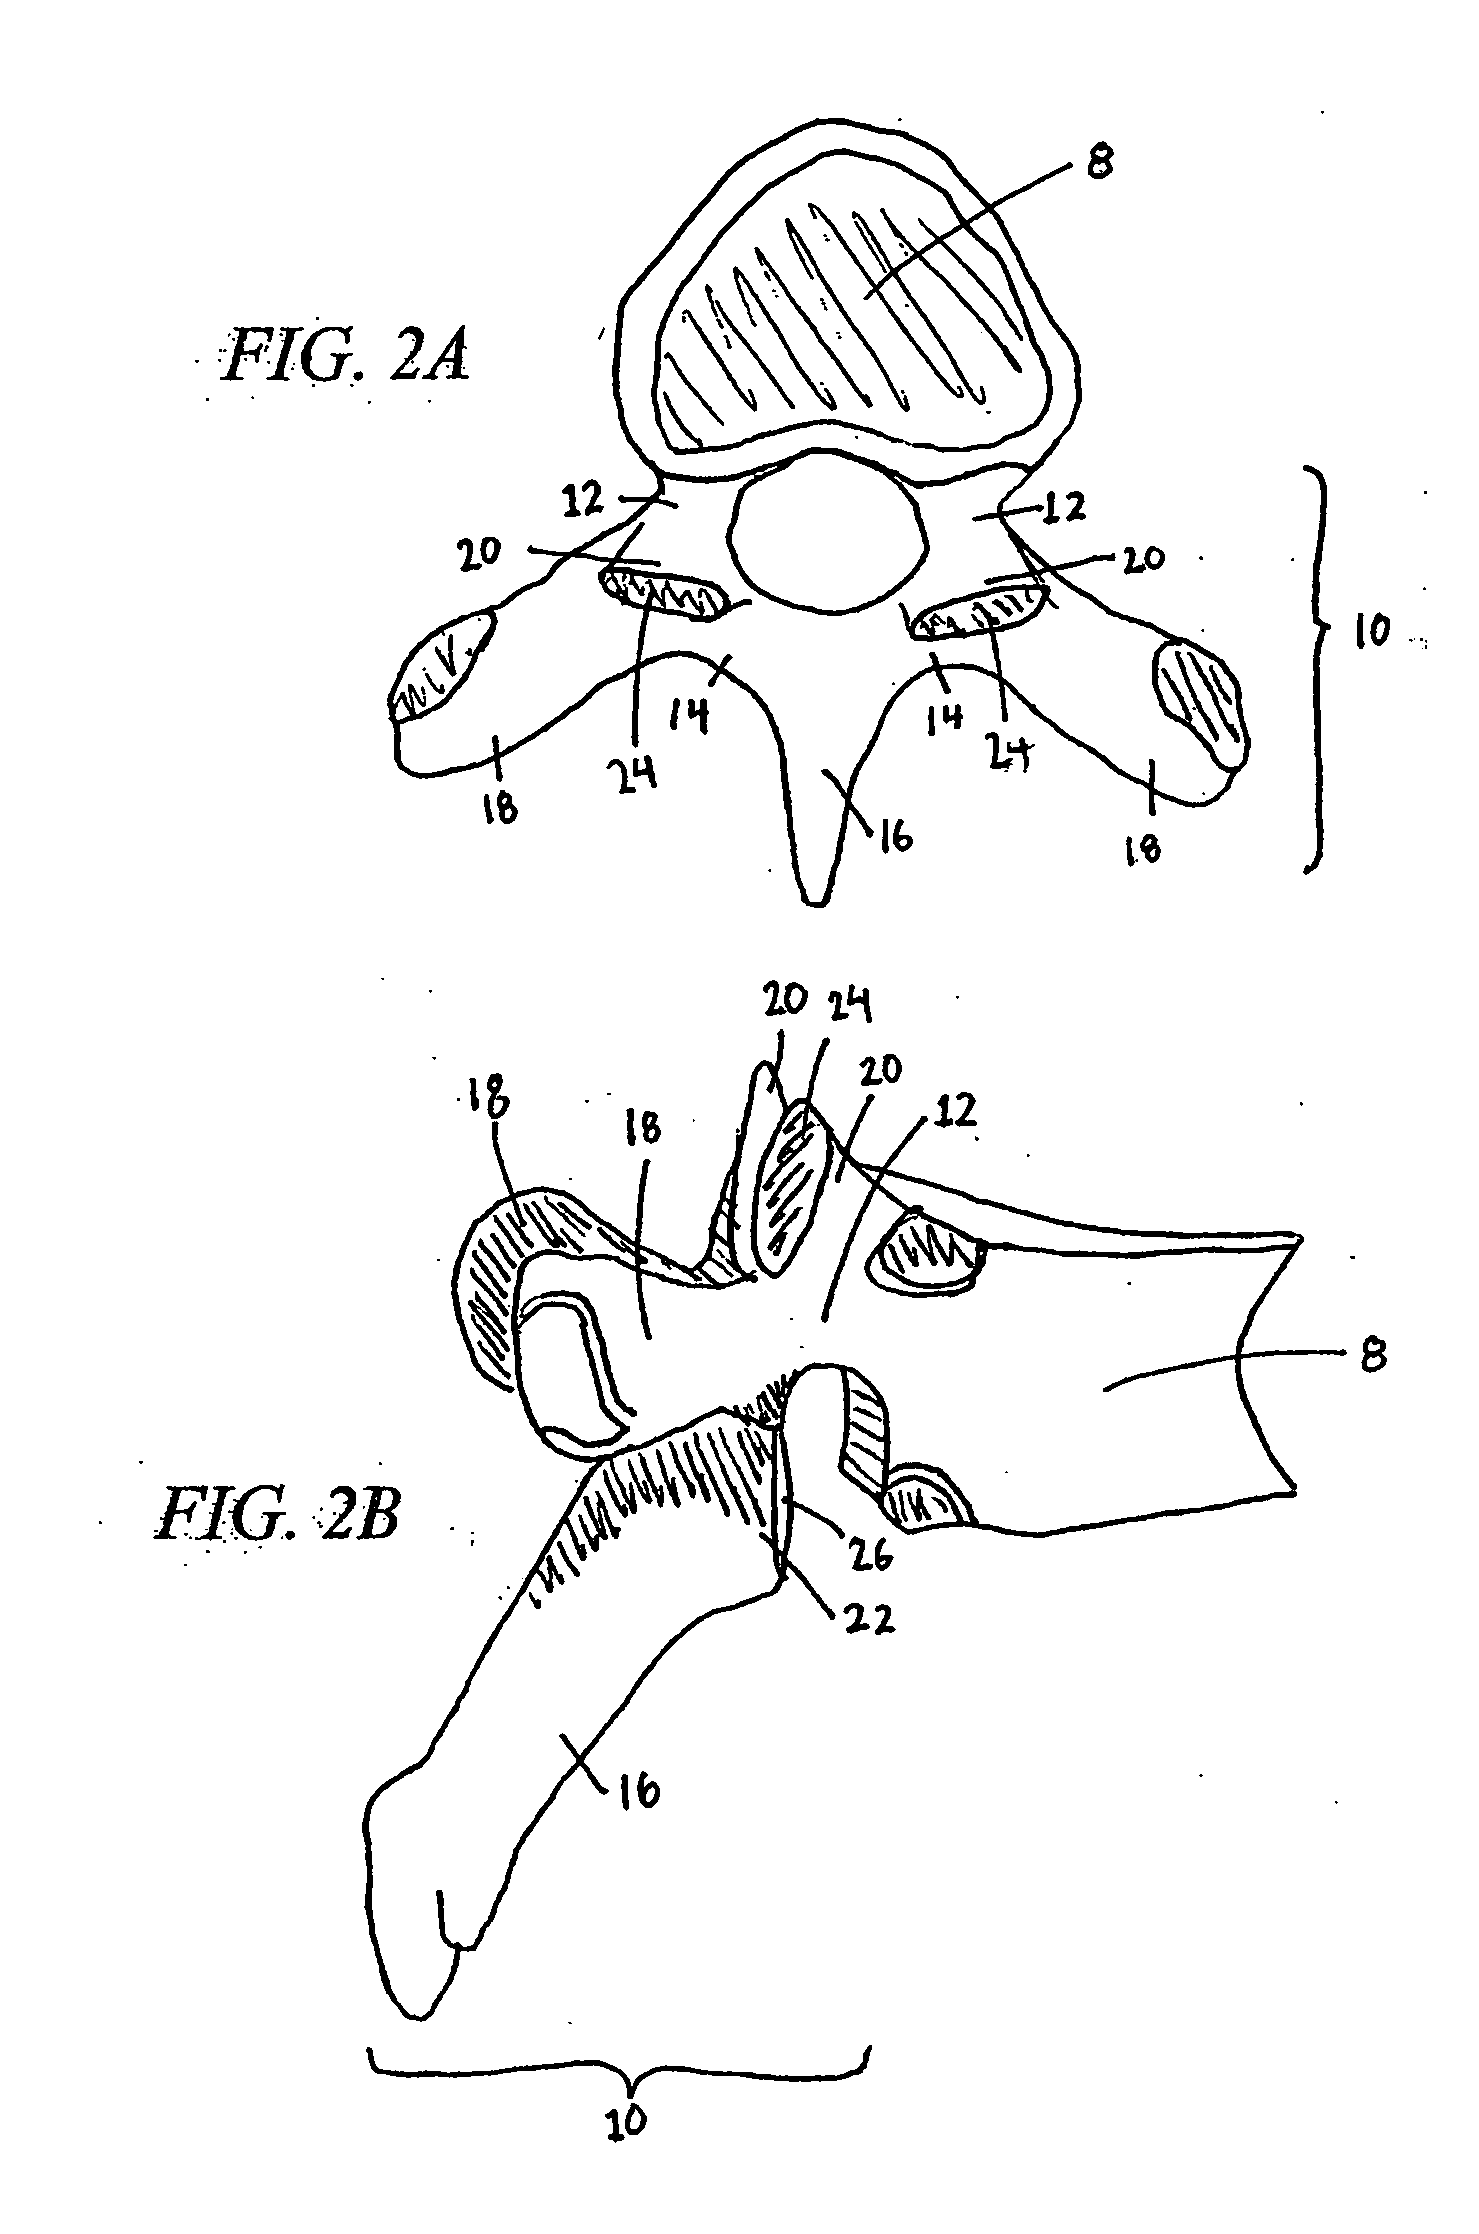 Flanged interbody fusion device with hinge